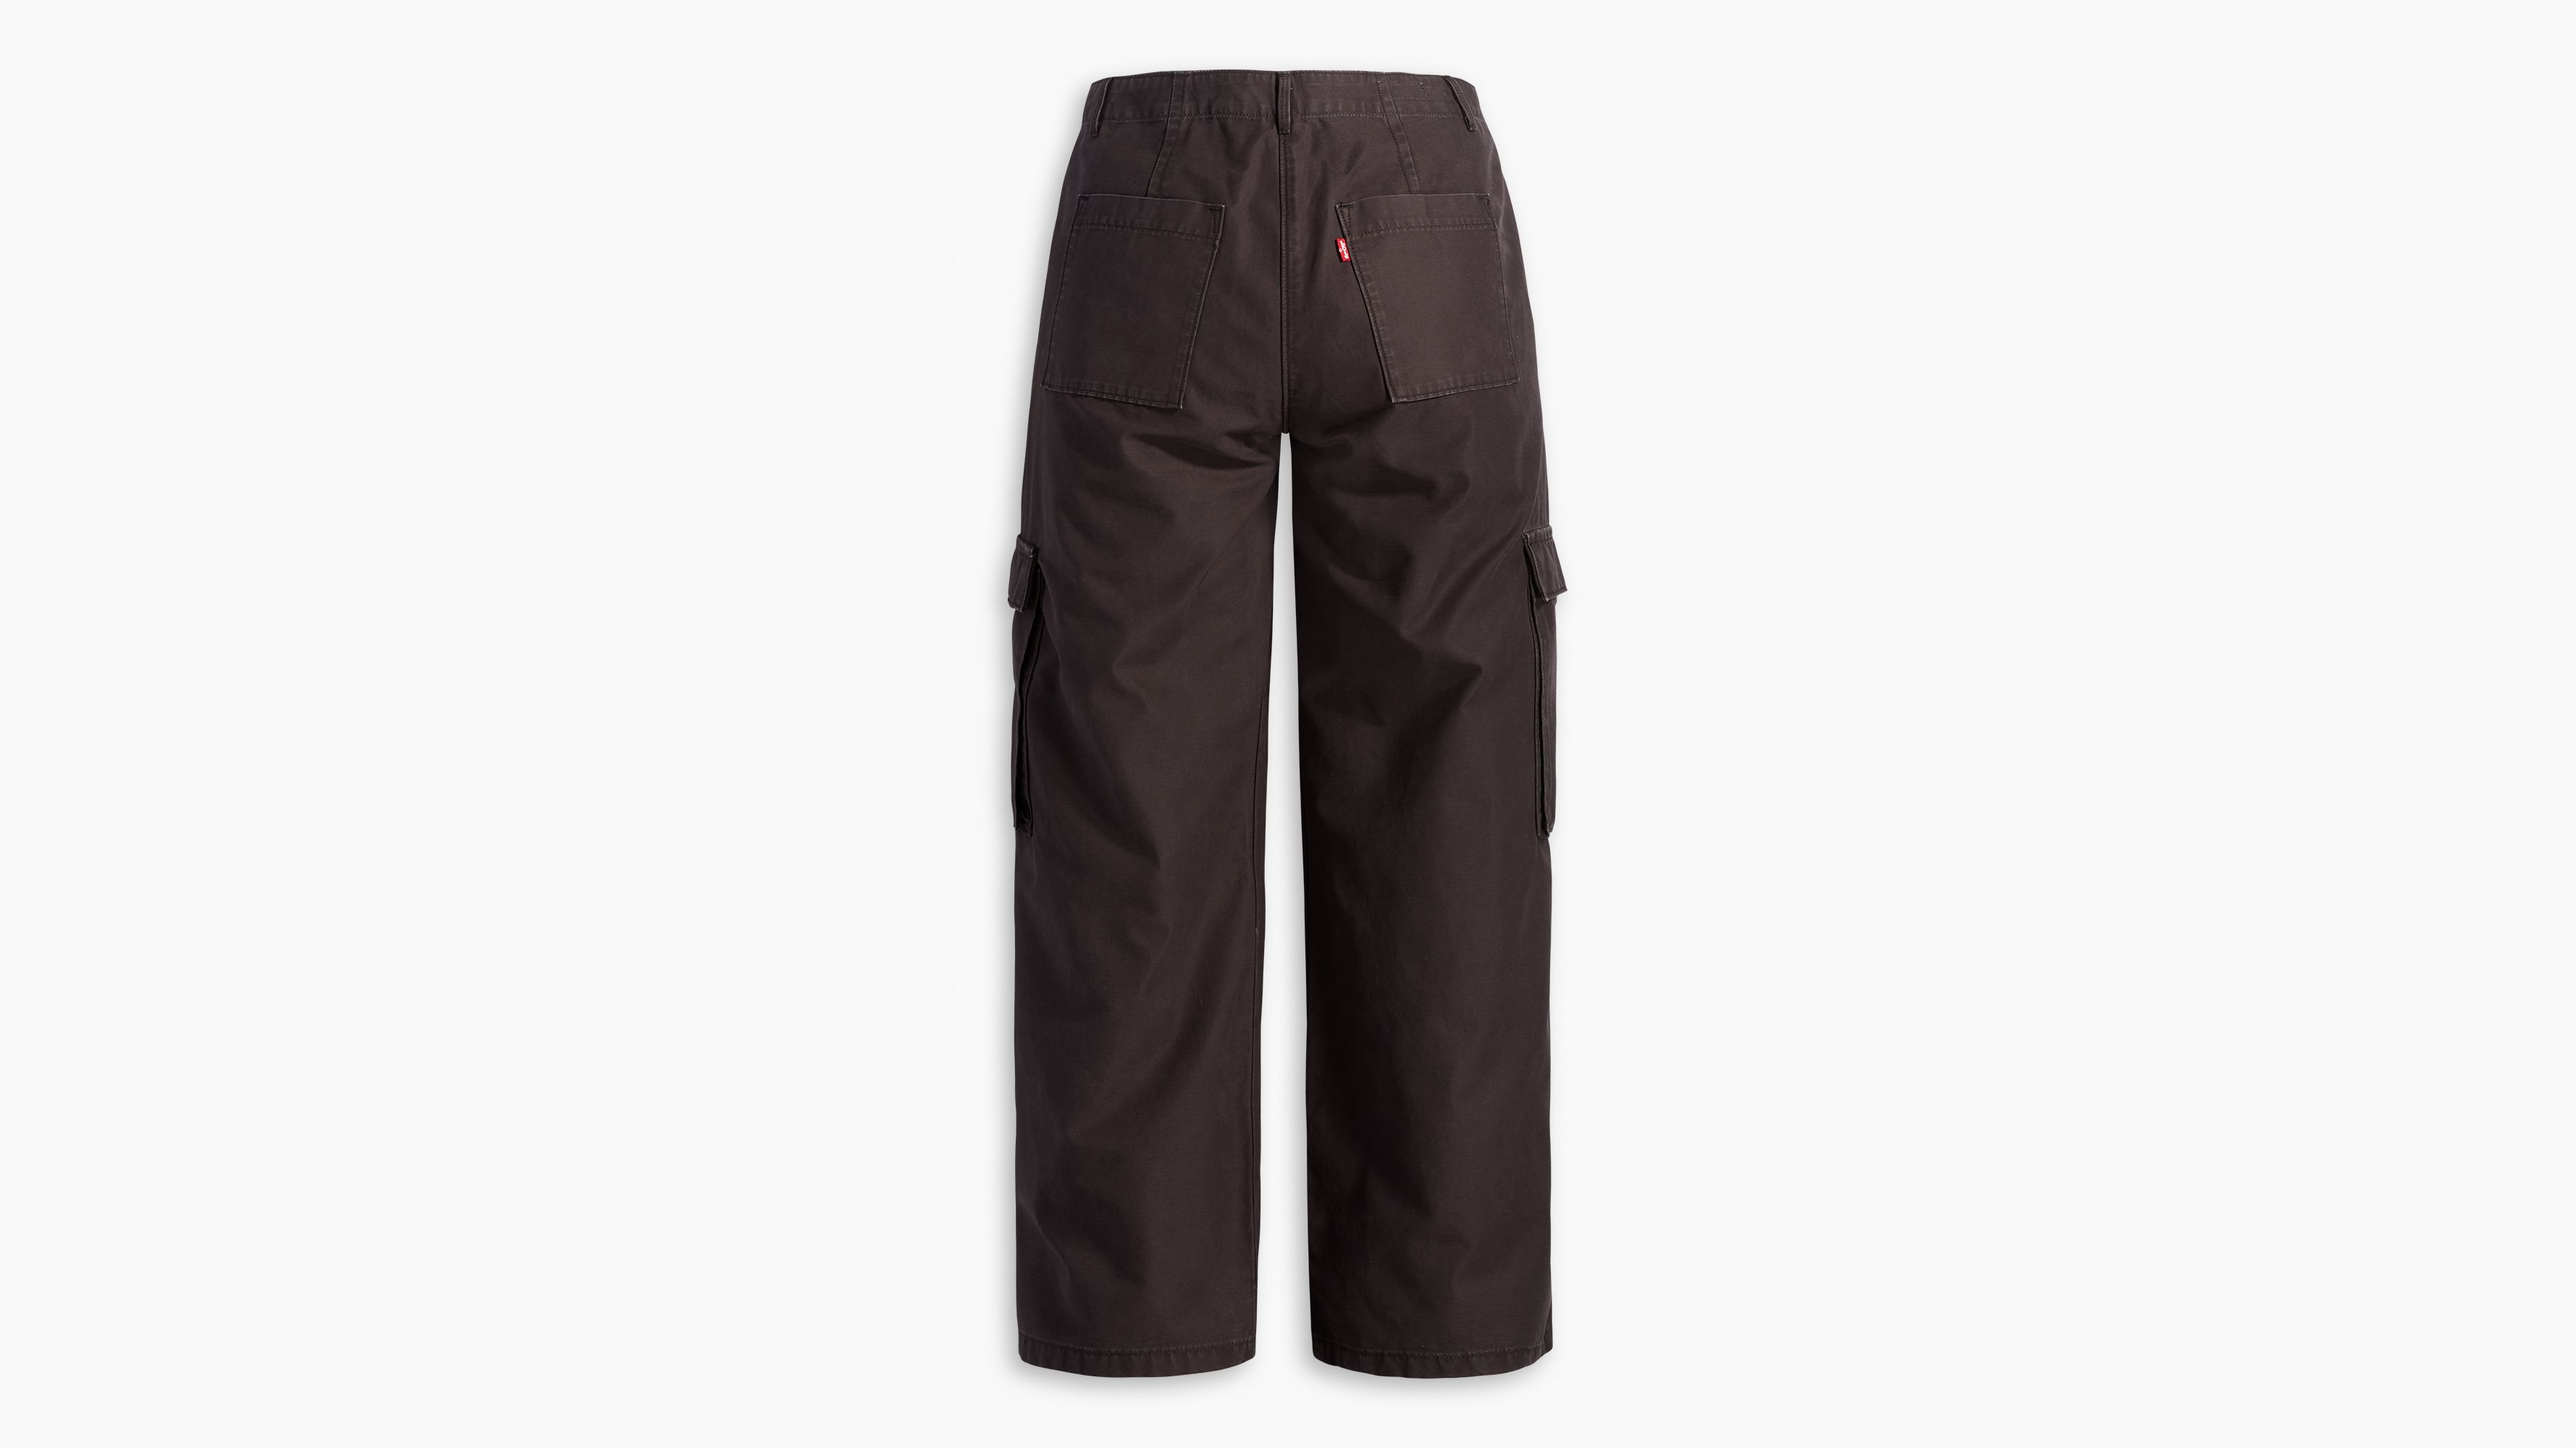 Twill Baggy Cargo Pocket Pants in Washed Black